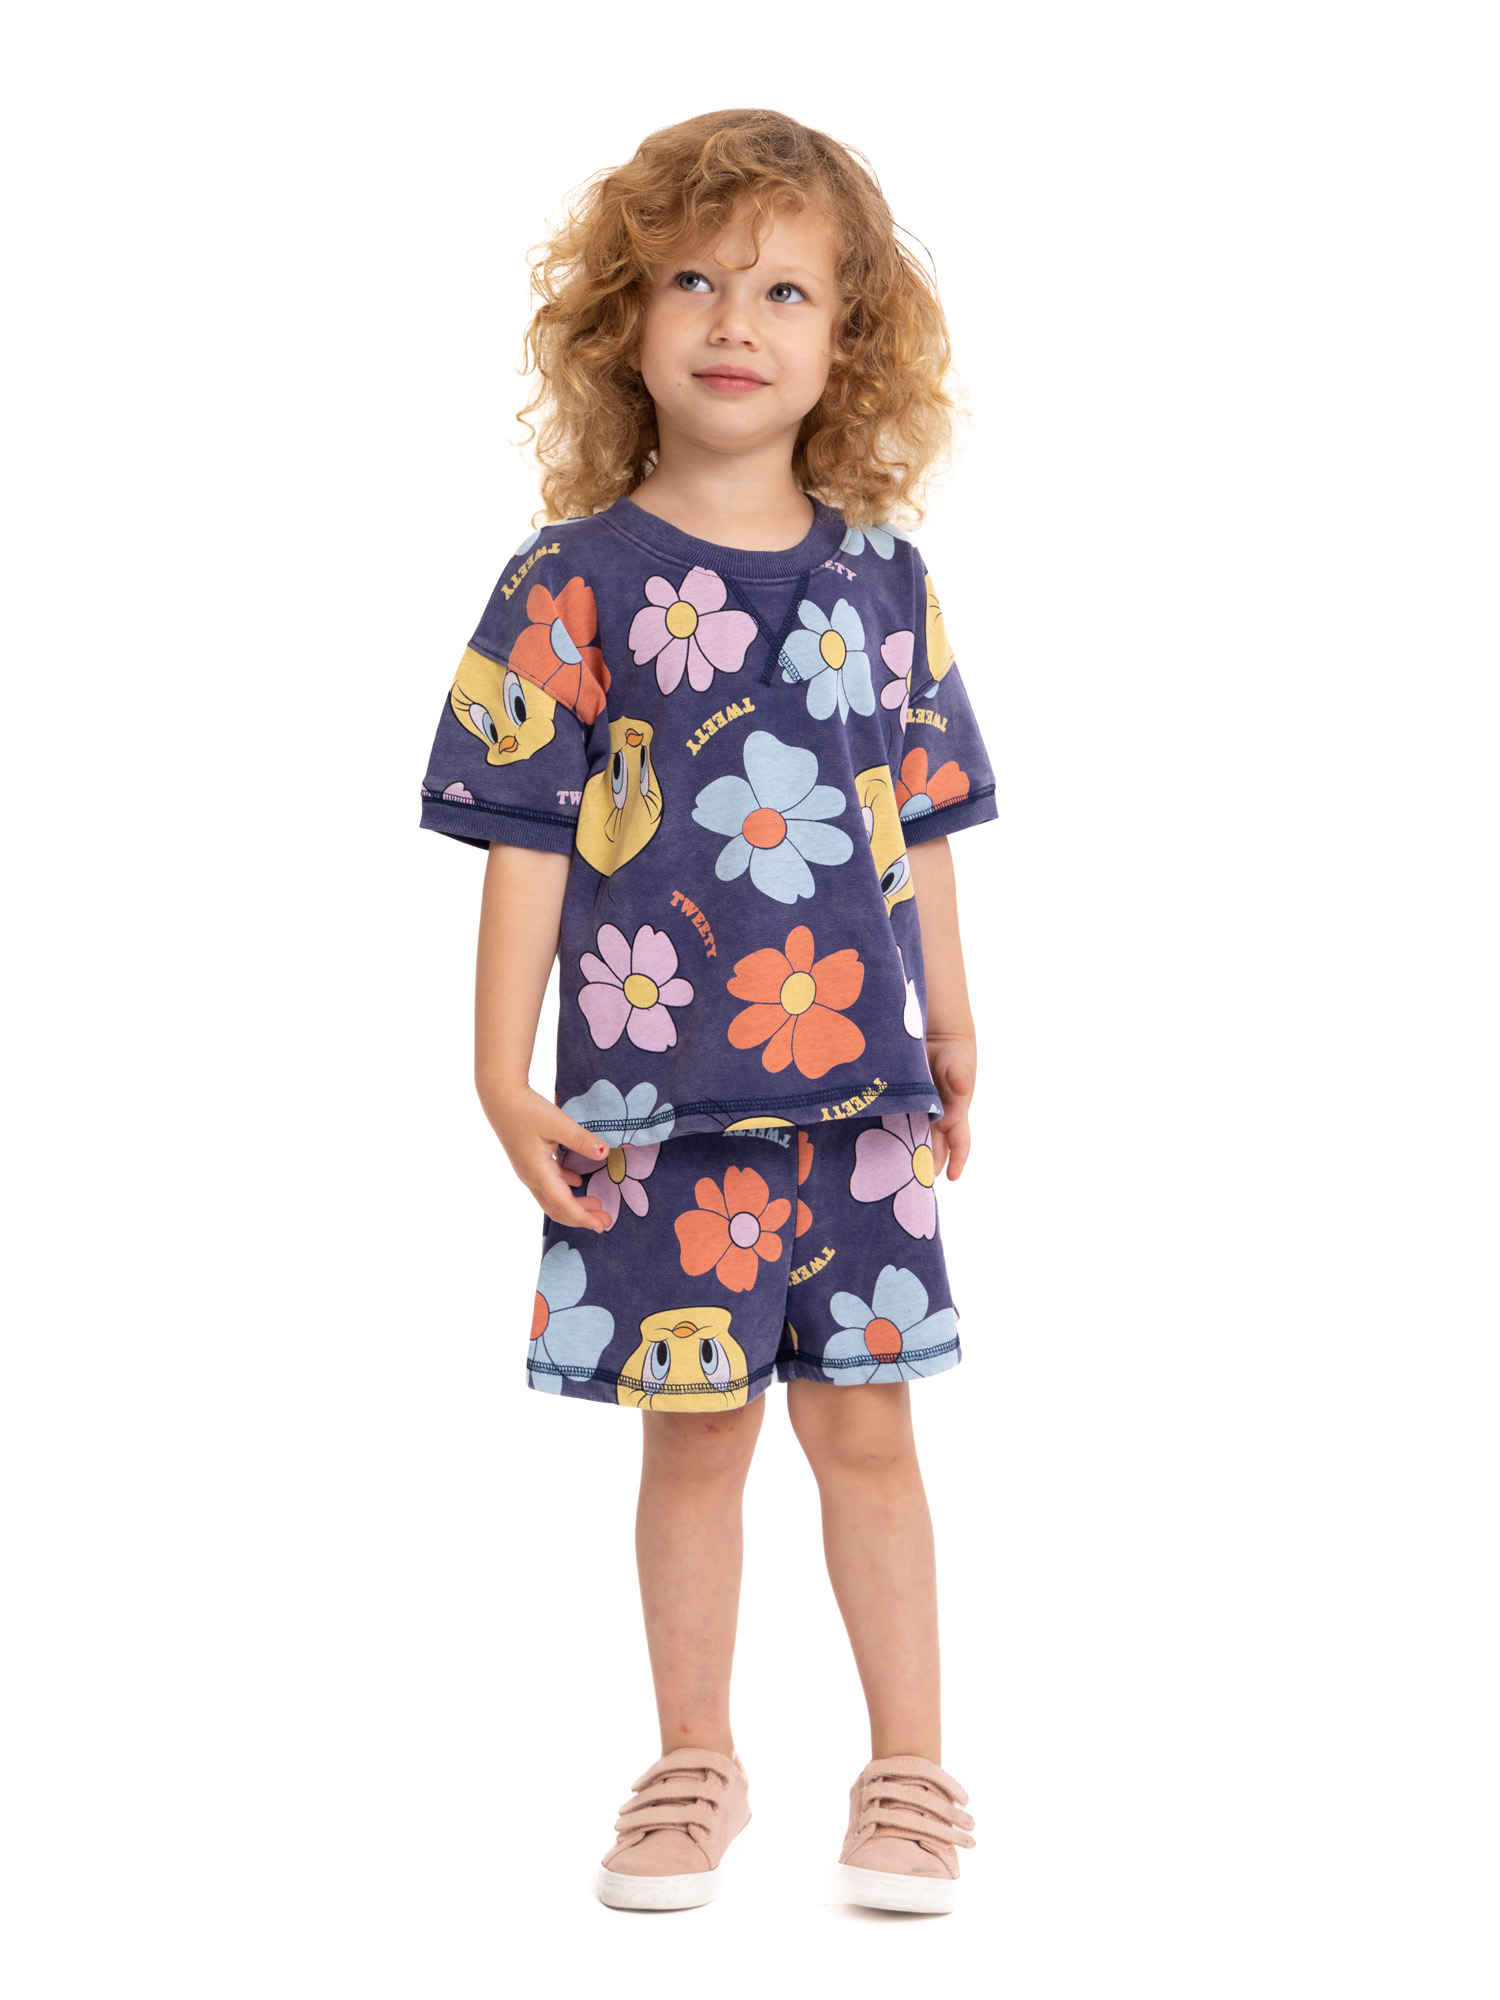 Looney Tunes Toddler Girls Tee and Shorts Set, 2-Piece, Sizes 12M-5T - image 1 of 10